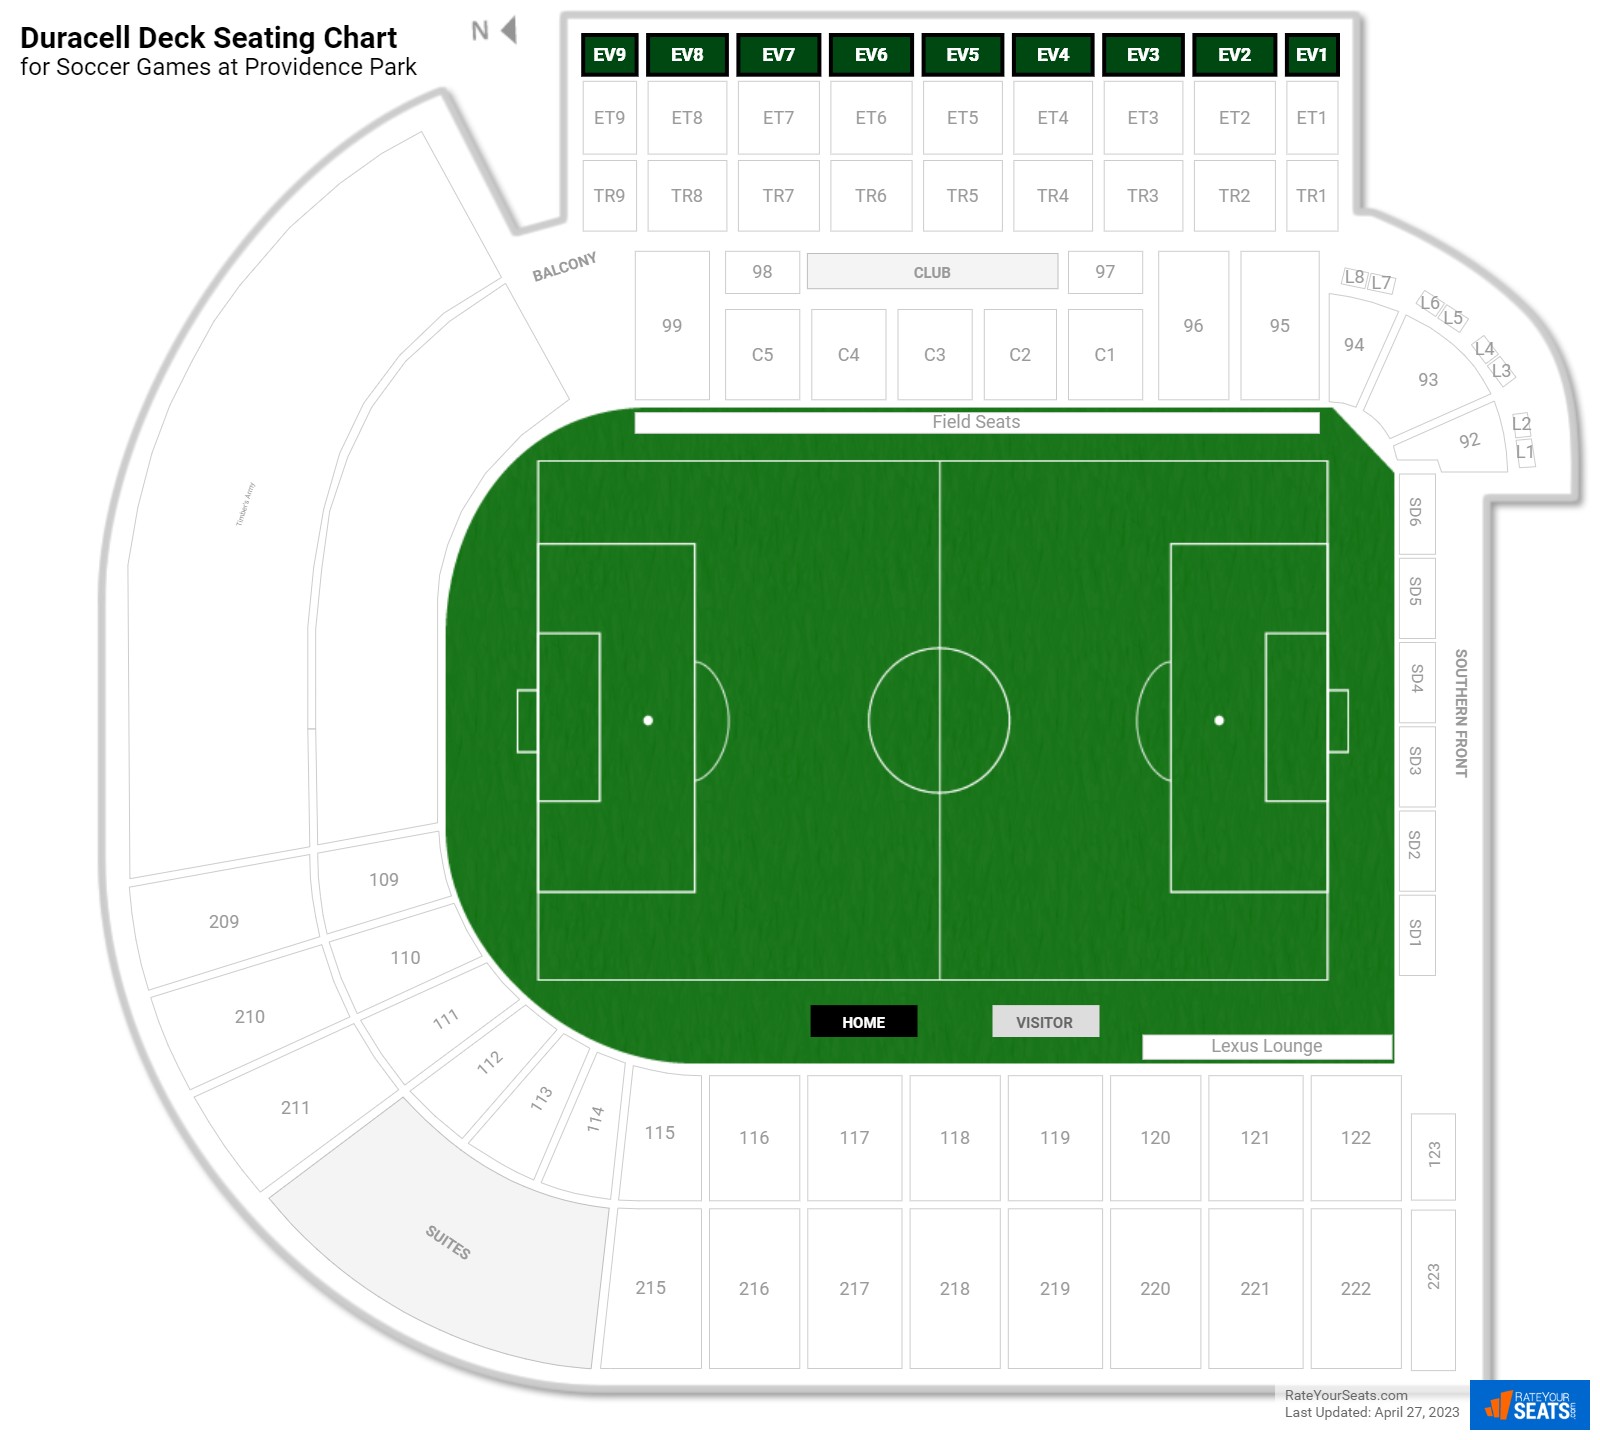 Soccer Duracell Deck Seating Chart at Providence Park